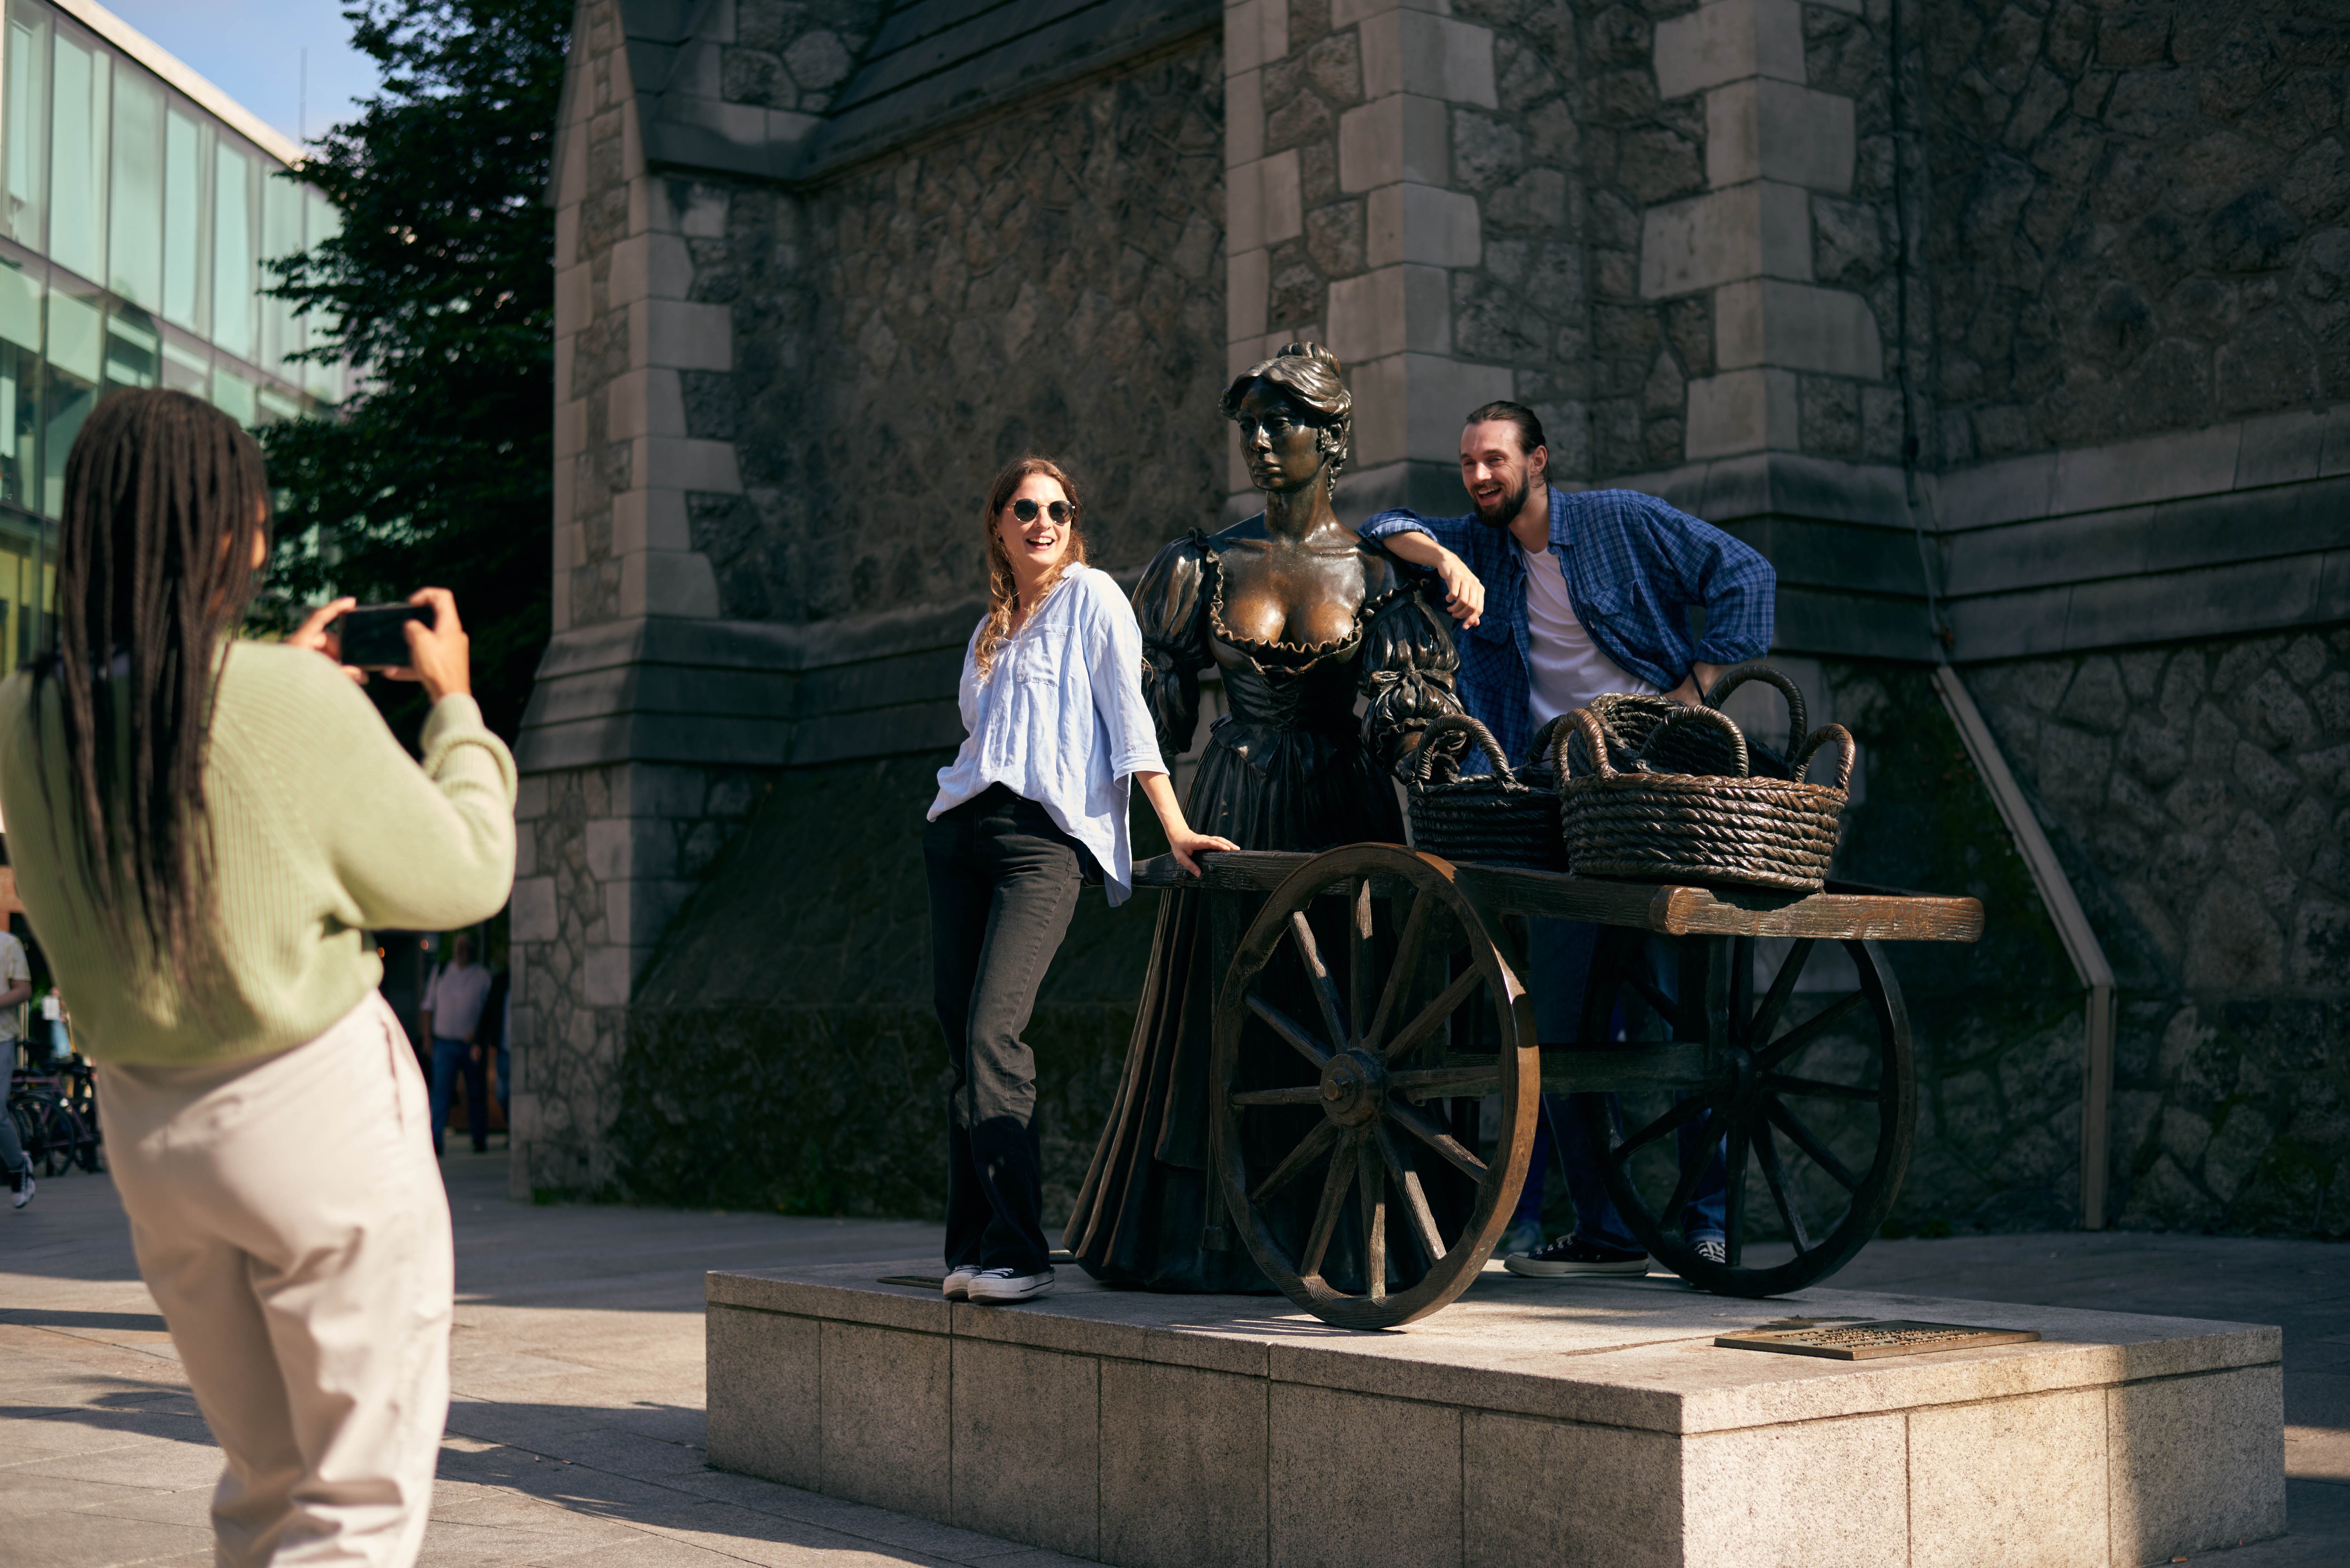 A group of friends posing with the Molly Malone statue while another friend takes their picture.